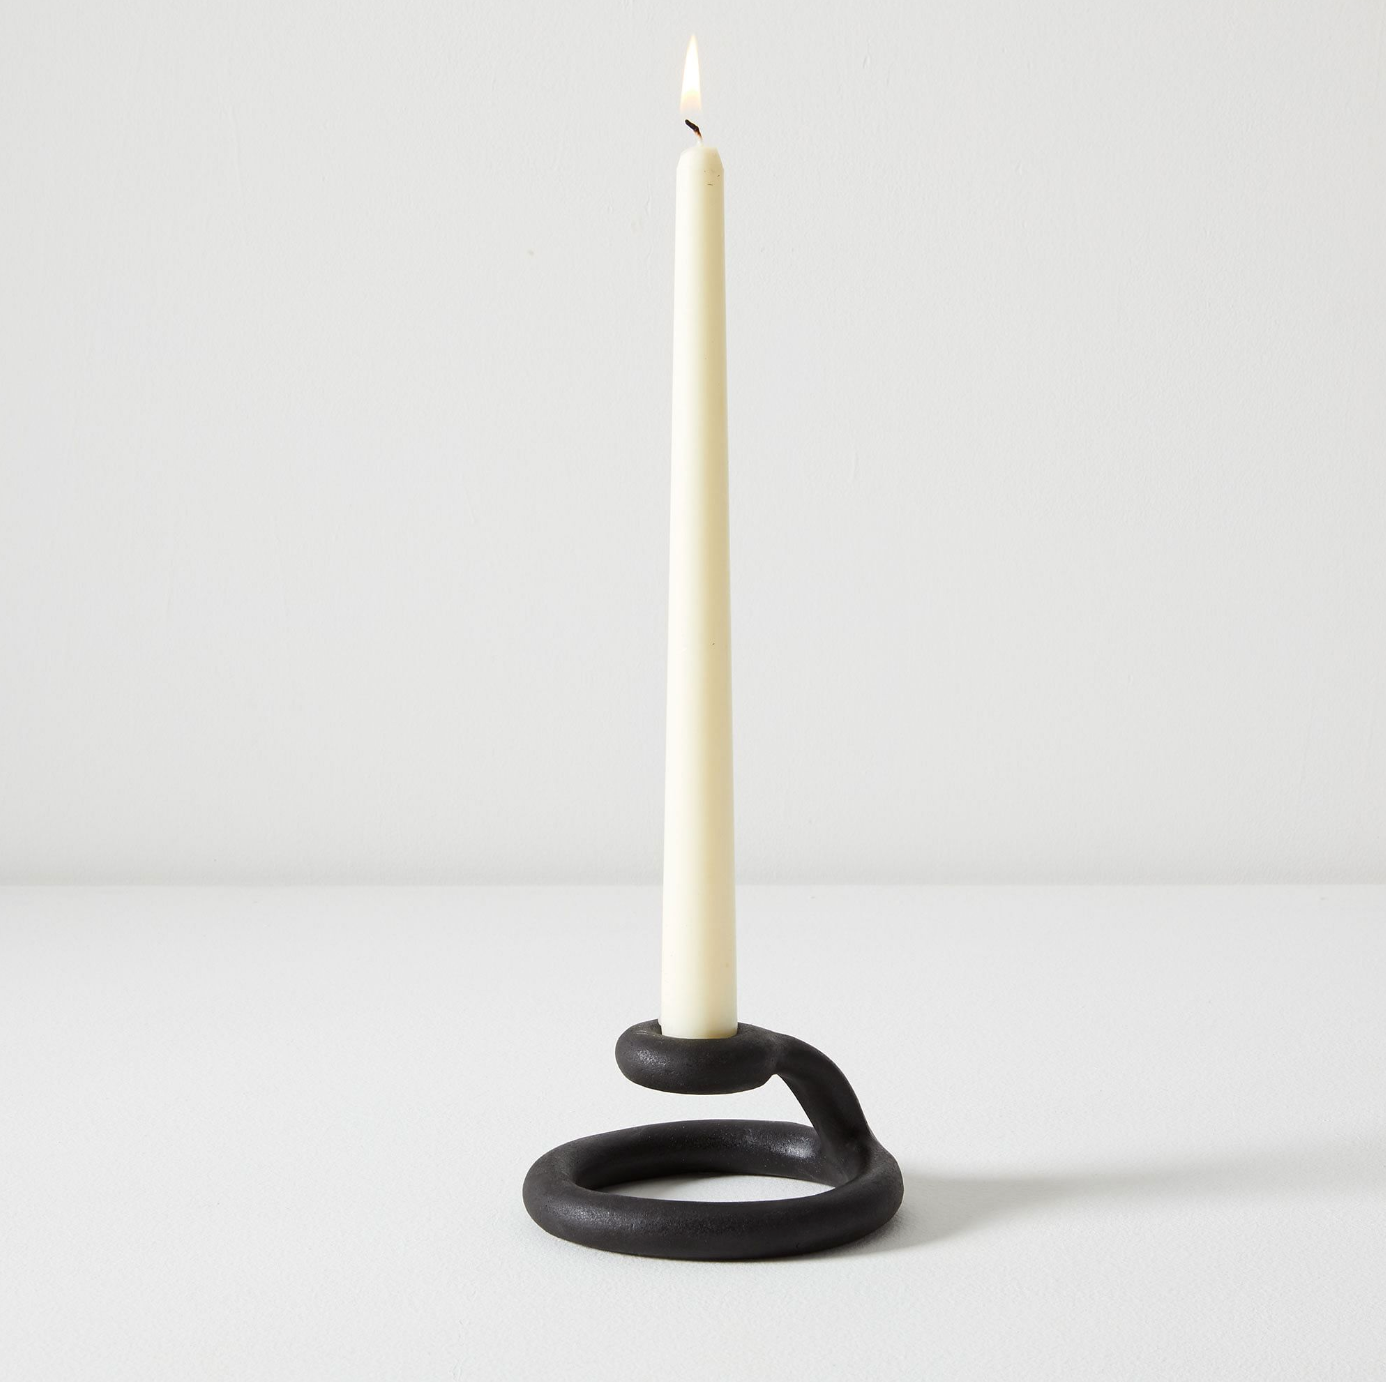 Virginia Sin coil built Uni candlestick helps you light up your life with something other than your dance partner. Handmade in Brooklyn, NY.